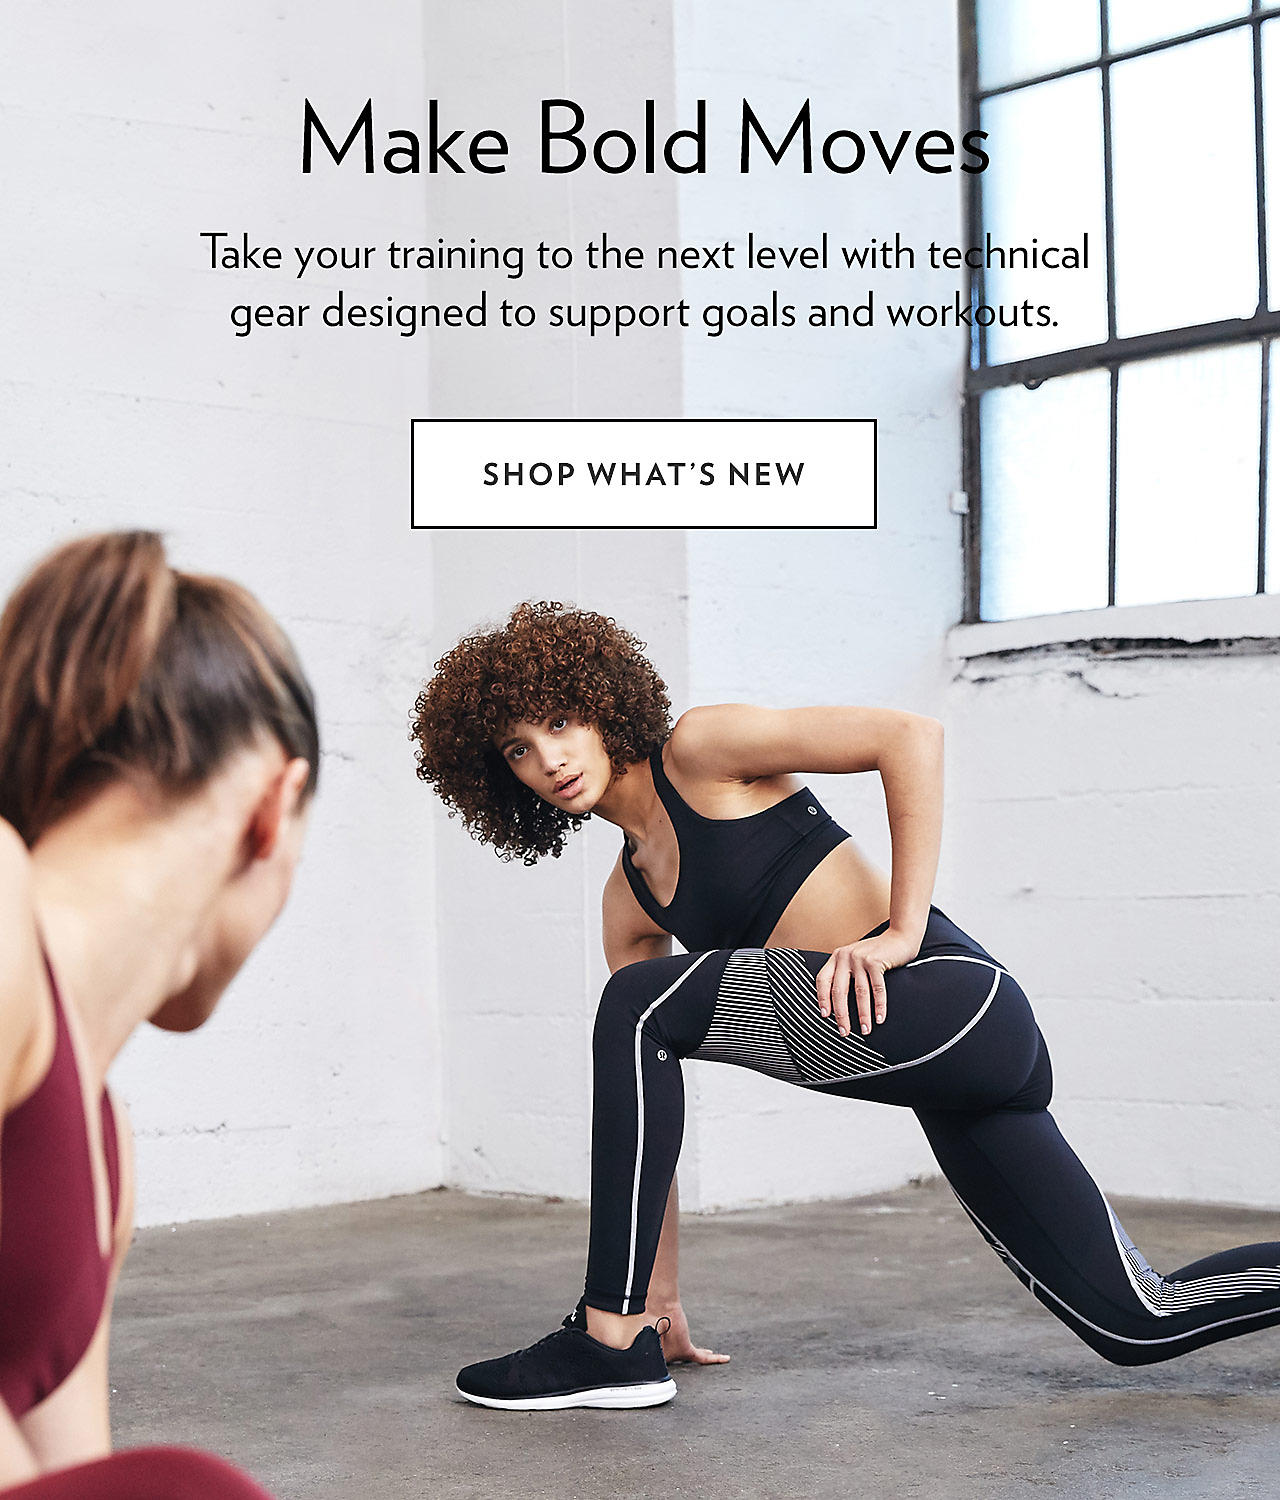 Make Bold Moves - SHOP WHAT'S NEW